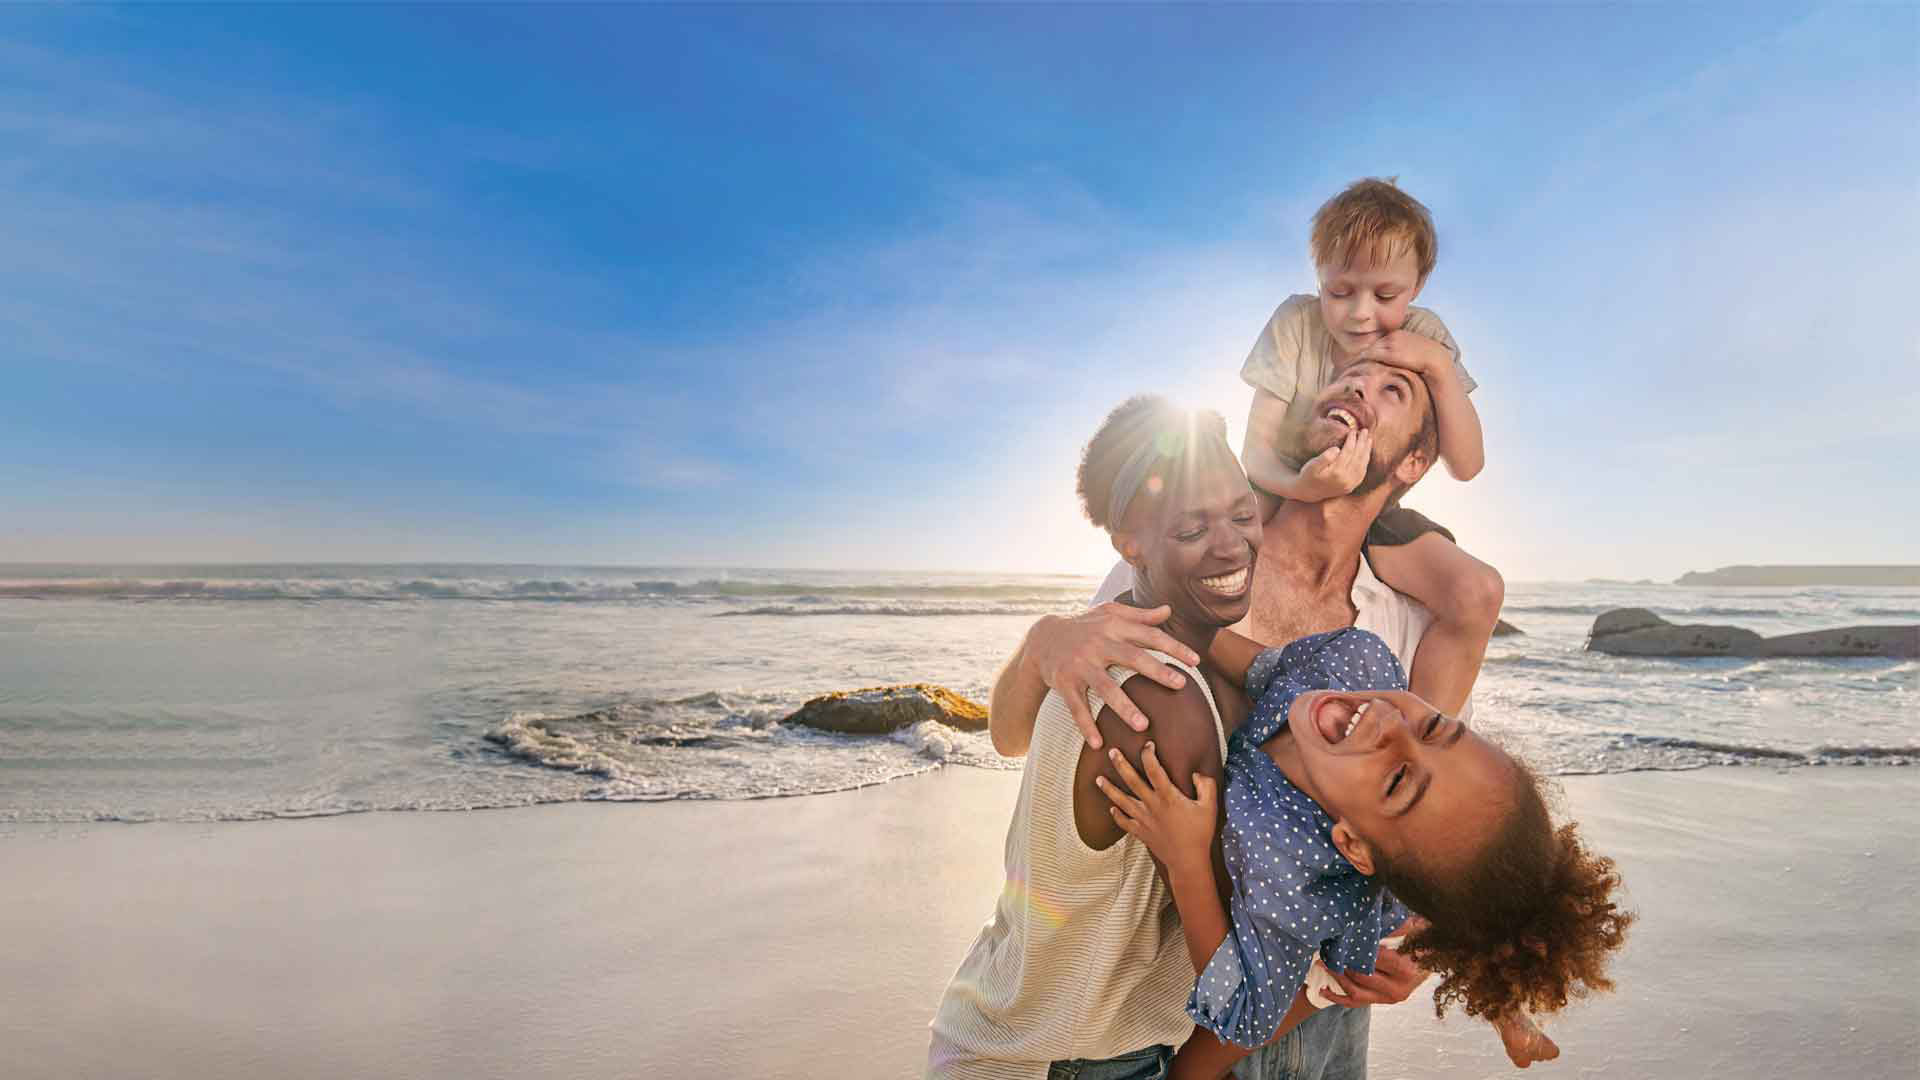 A family of 4 of mixed ethnicity laughing happily on the beach.